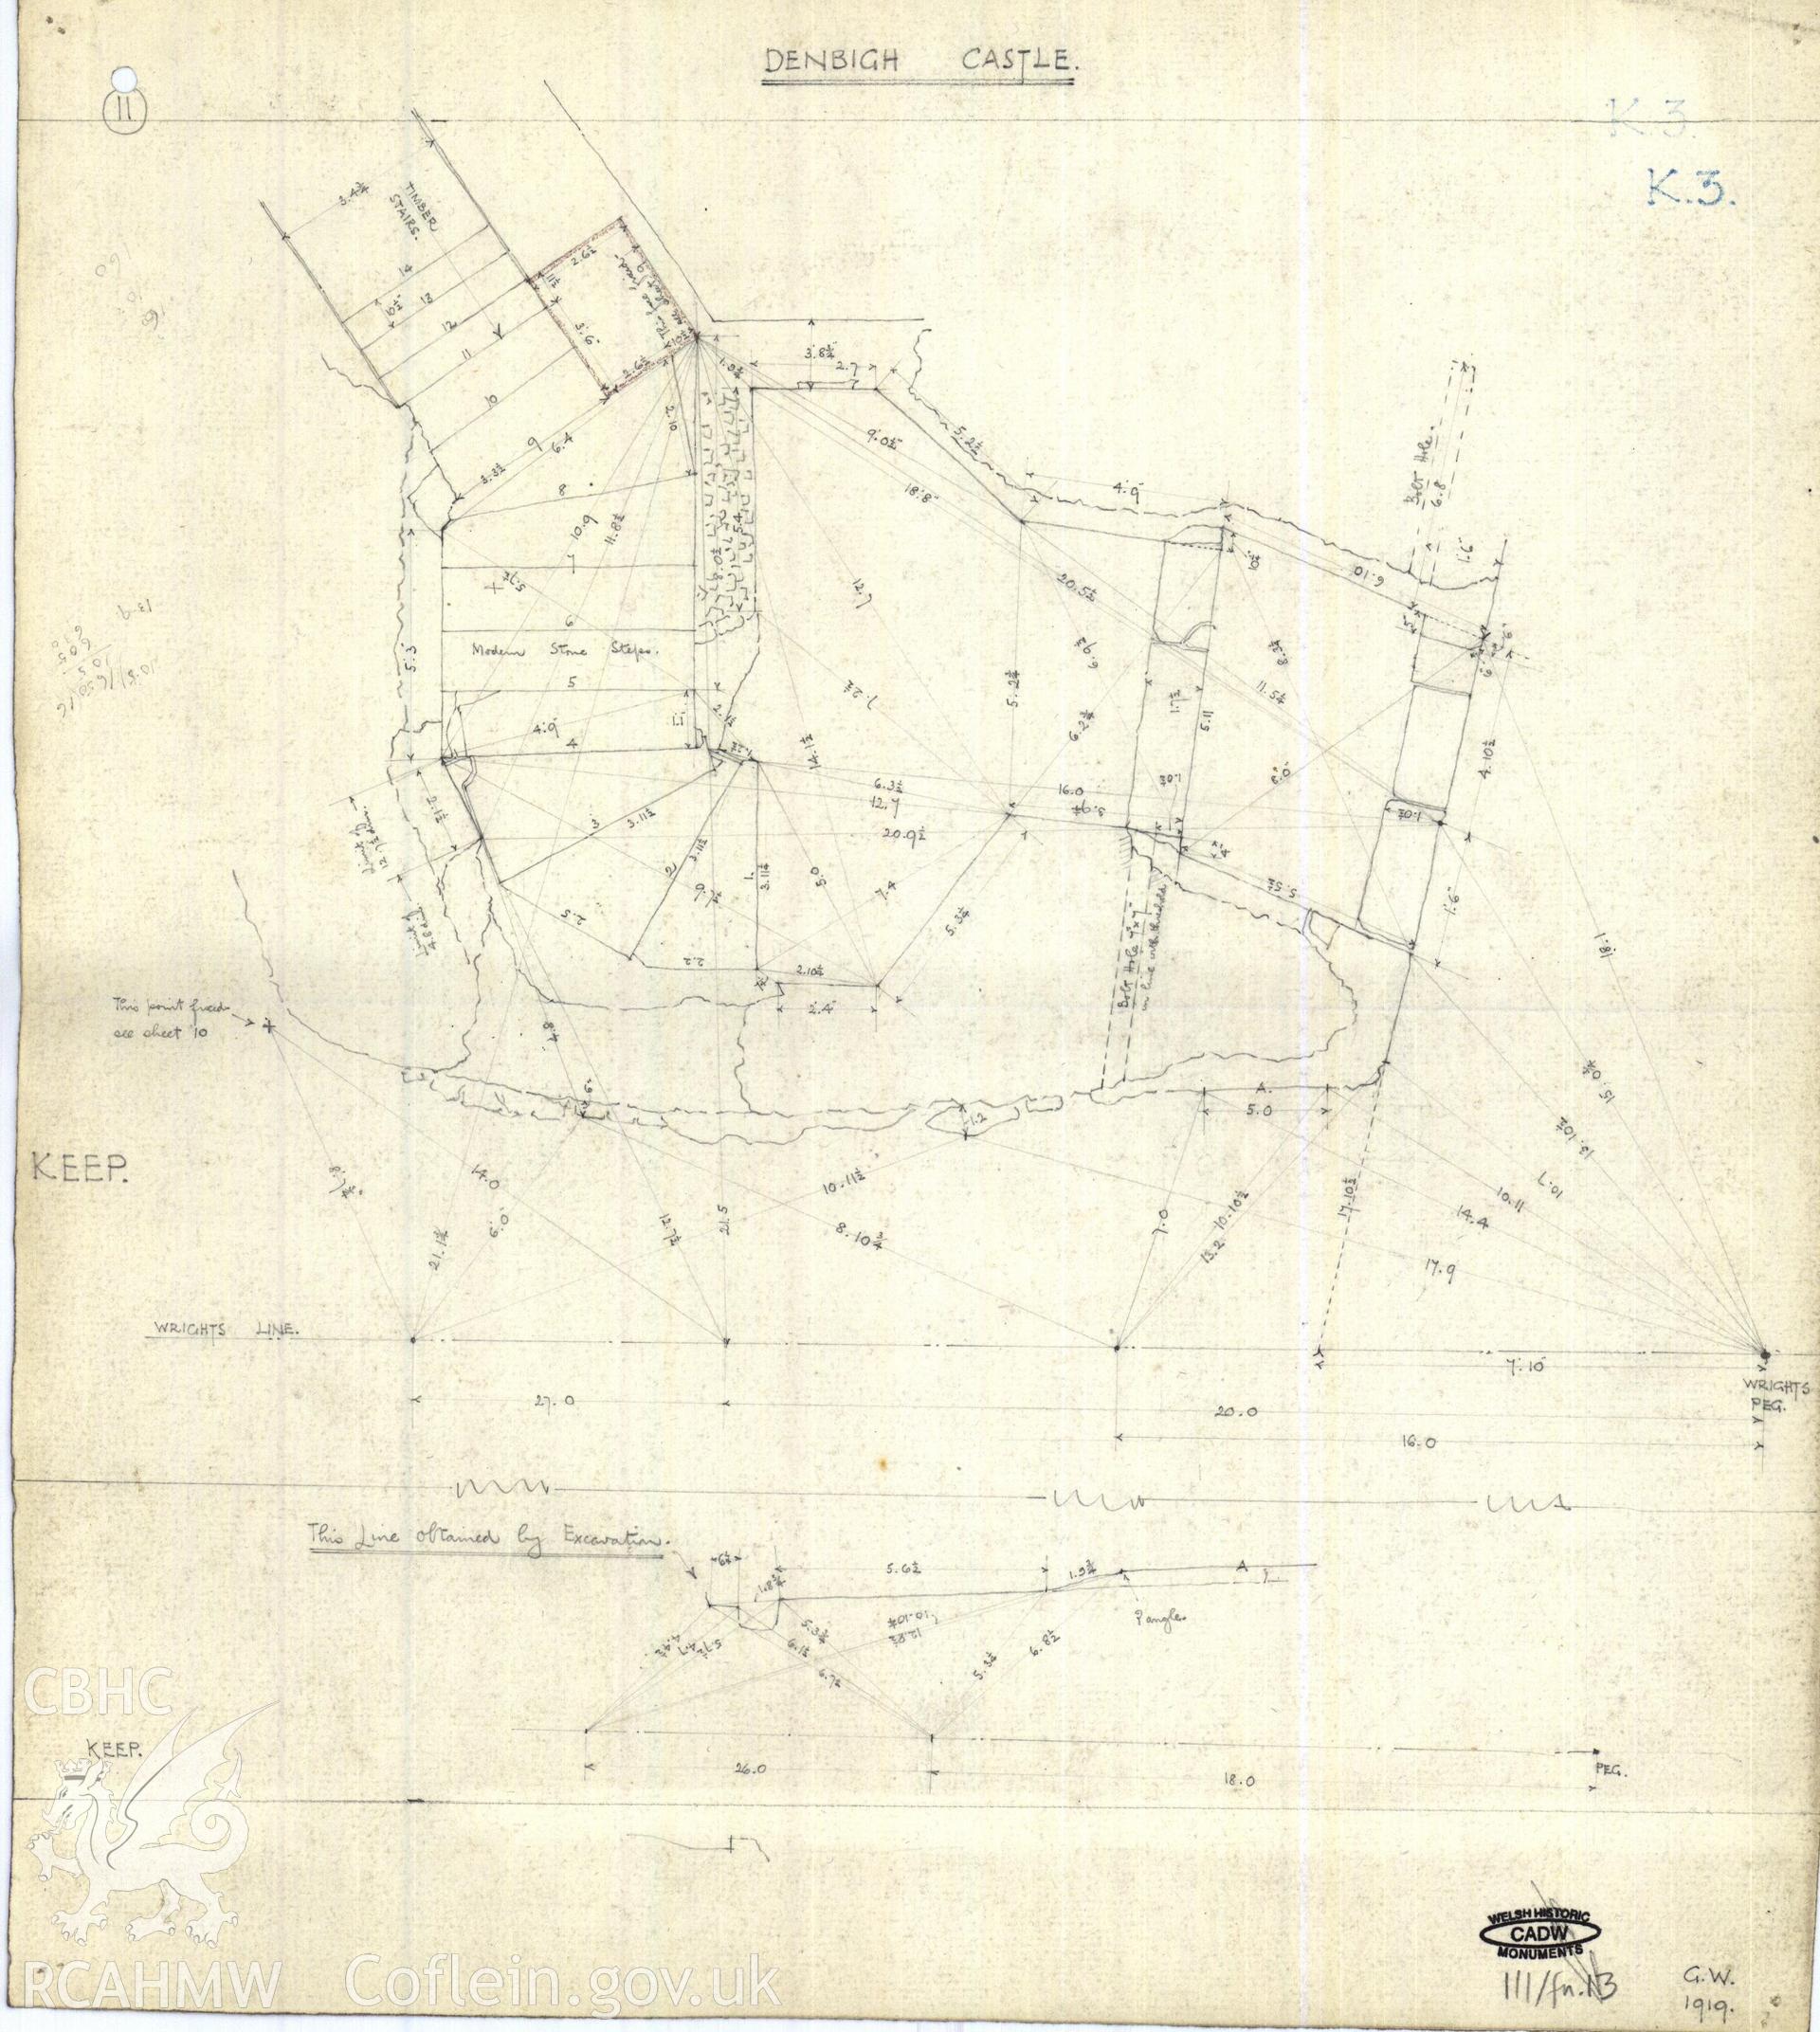 Cadw guardianship monument drawing of Denbigh Castle. T1, s, spiral stairs to NW (11) K3. Cadw Ref. No:111/fn.13. No scale.